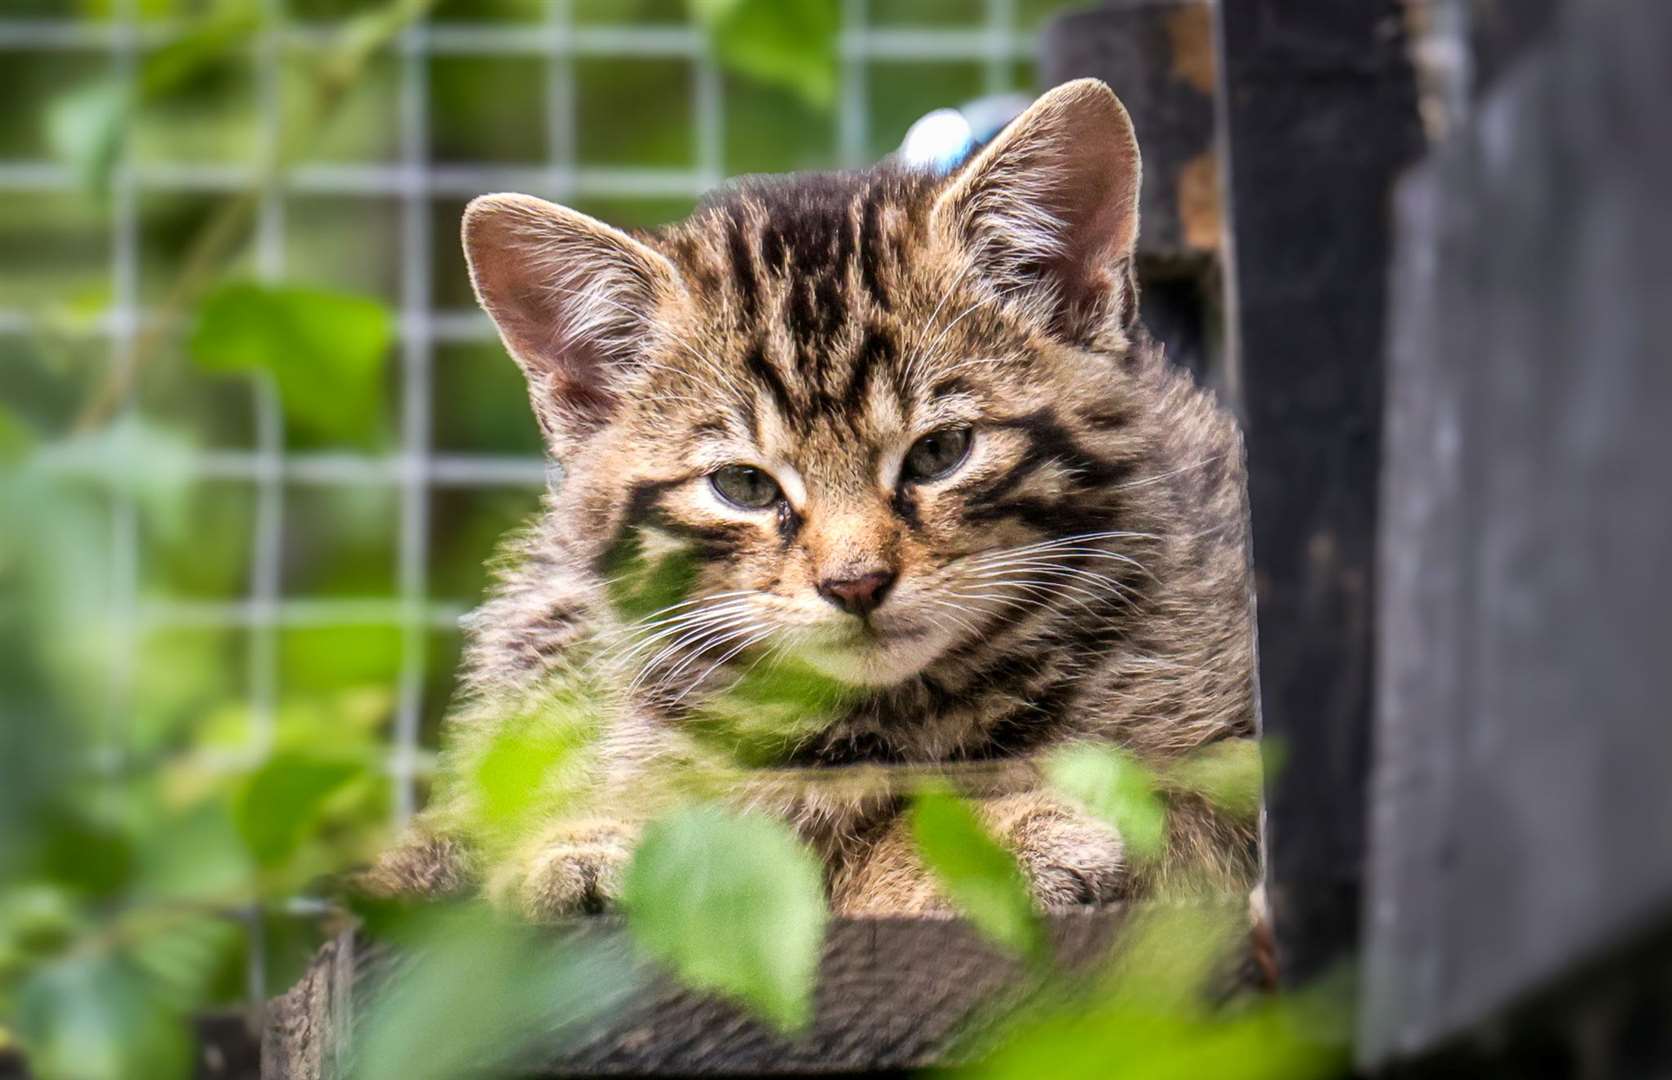 Wildwood has welcomed the arrival of four wildcat kittens. Picture: Dave Butcher